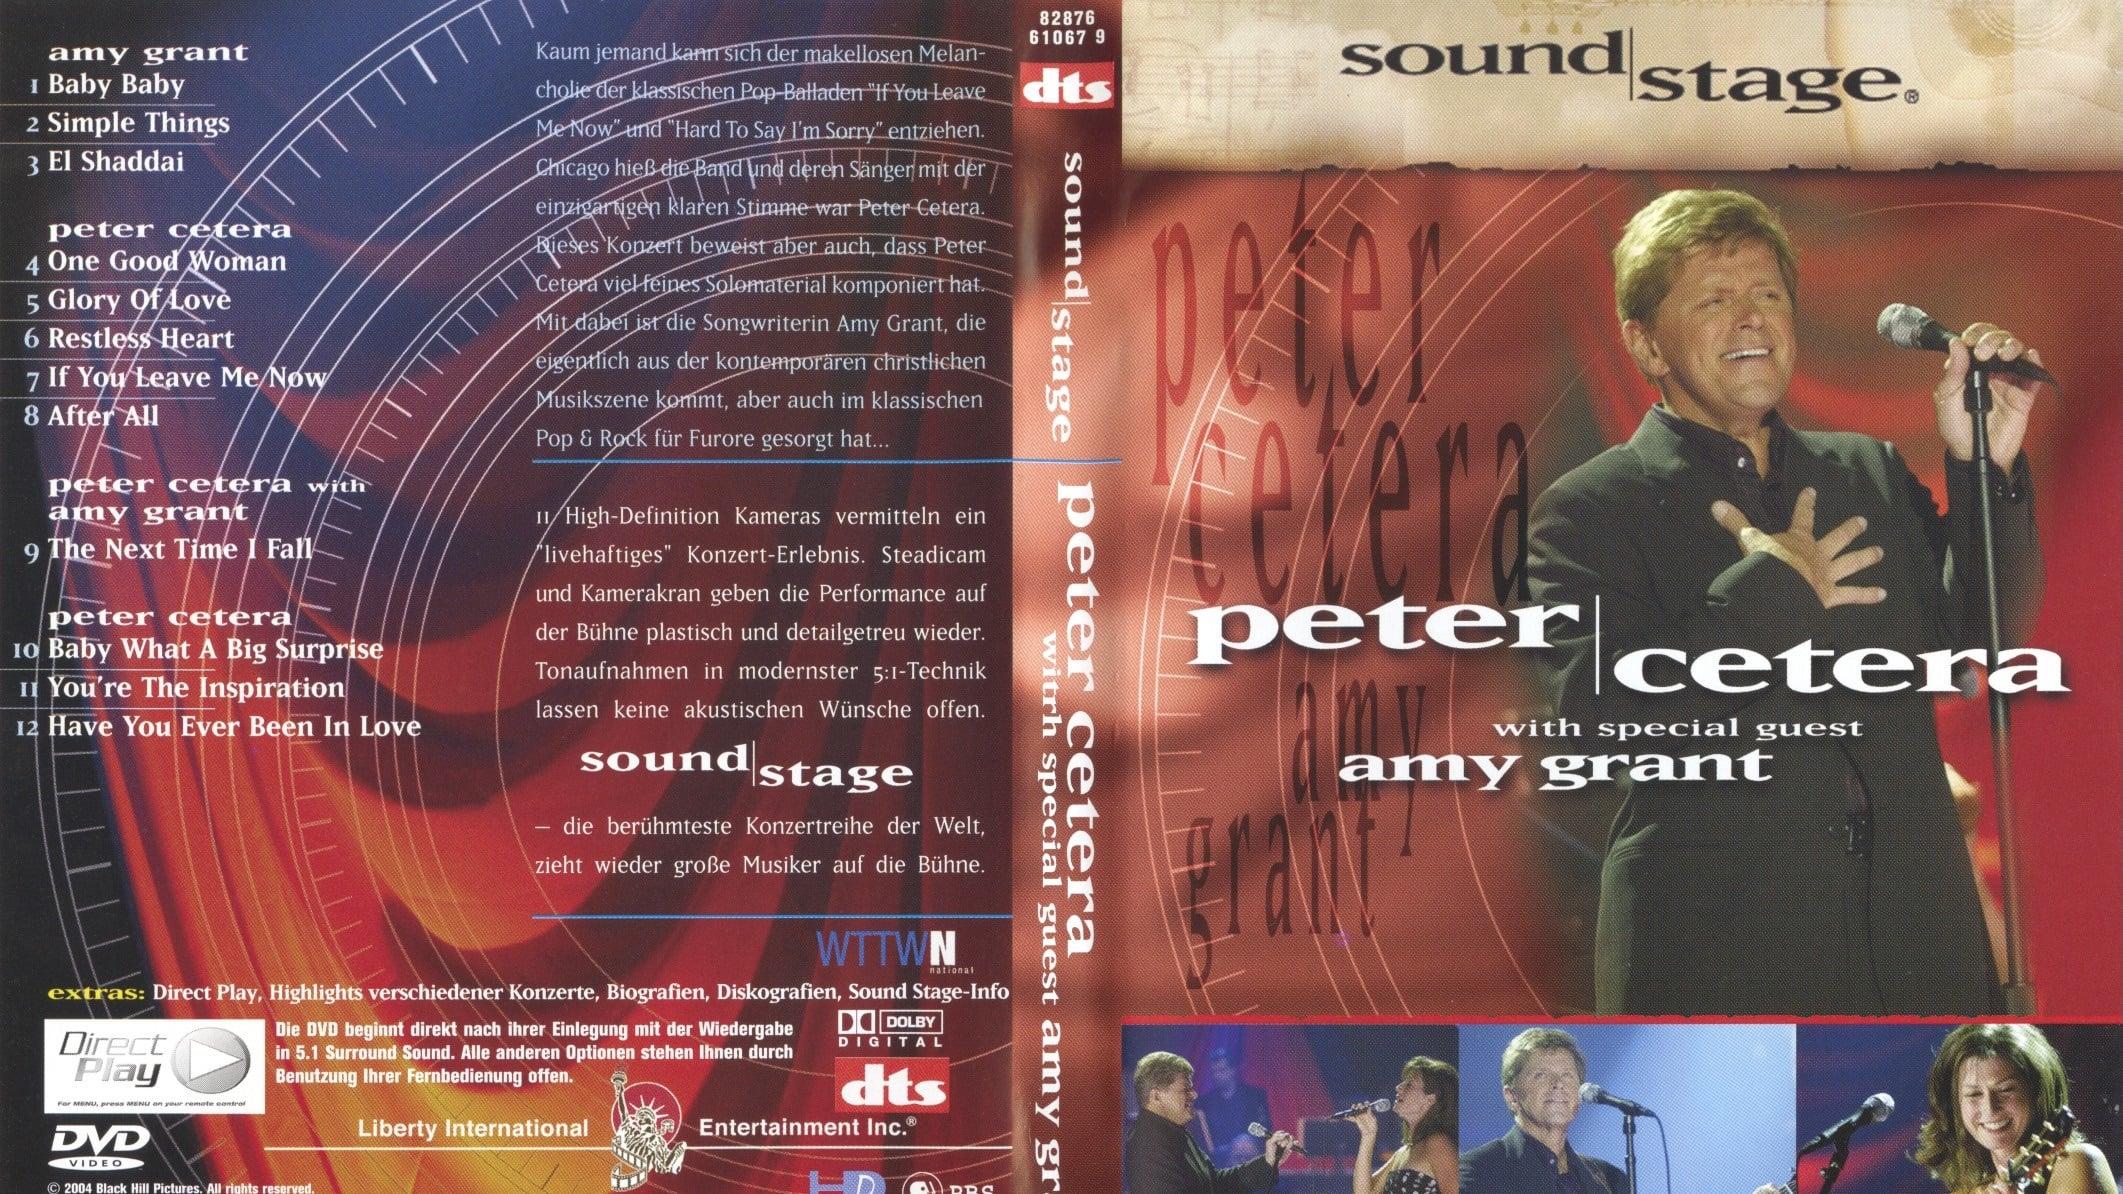 SoundStage Presents: Peter Cetera & Amy Grant backdrop